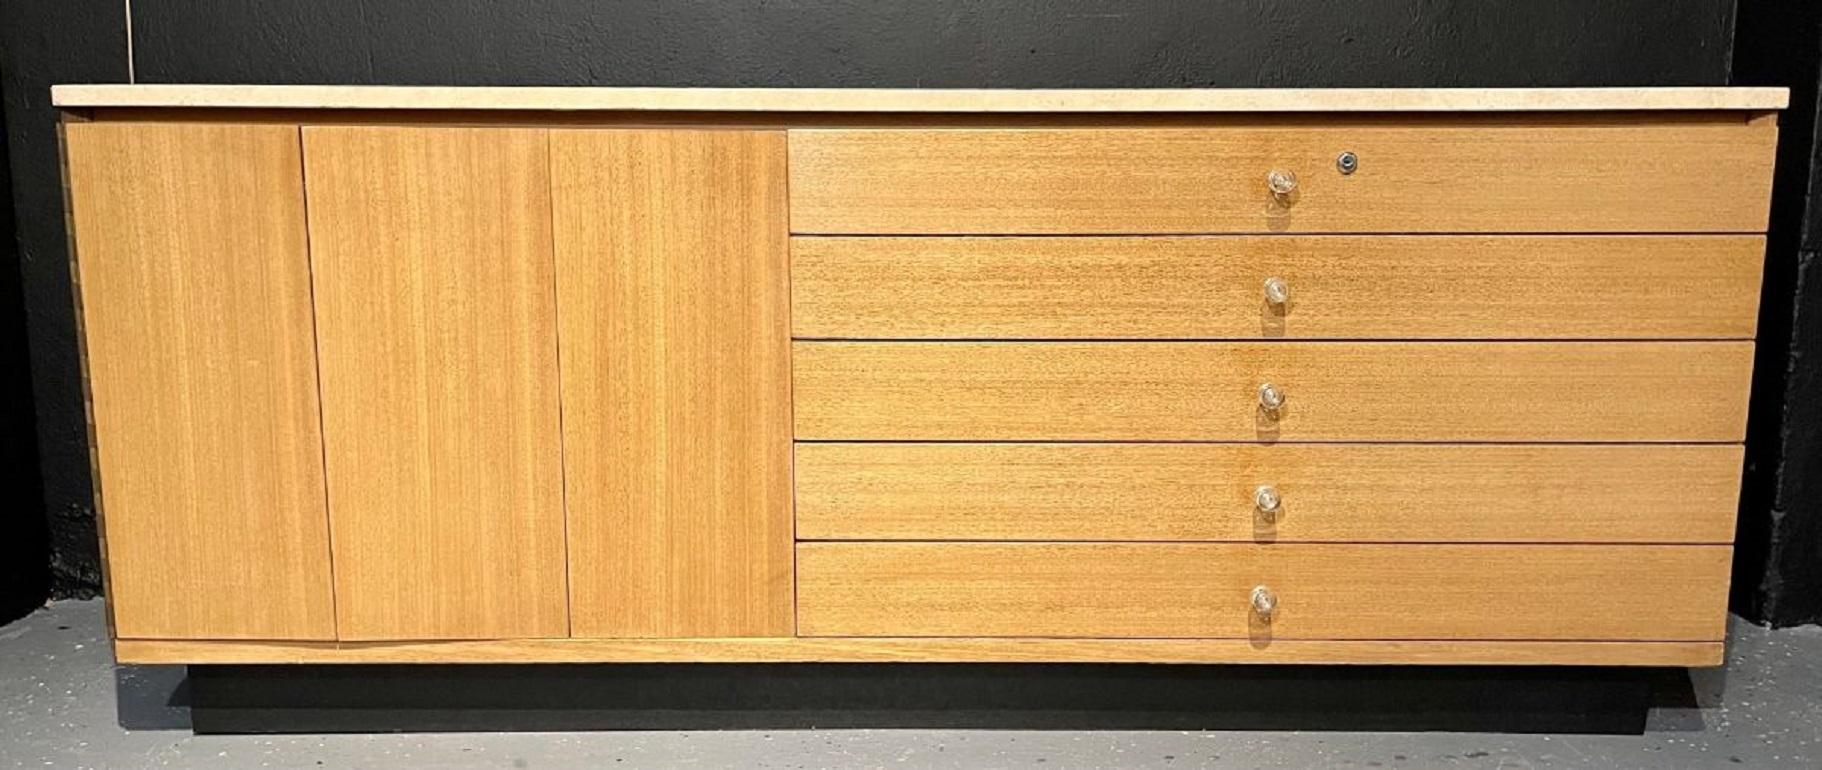 Mid-20th Century Mid-Century Modern Sideboard by Paul McCobb Credenza, Irwin Collection For Sale